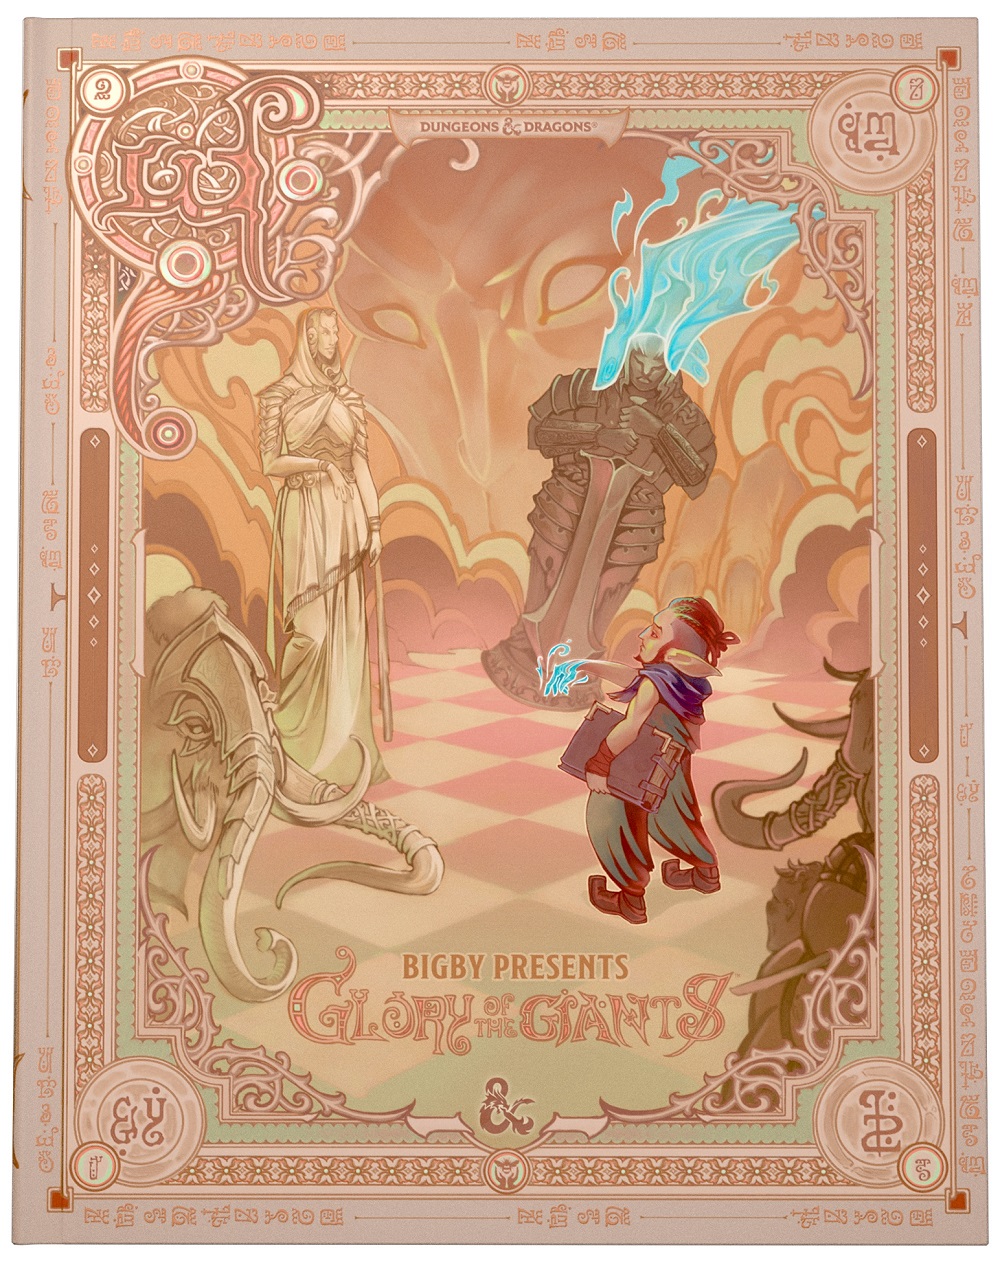 Dungeons & Dragons: Bigby Presents: Glory of Giants (Alt Cover) (HC) 